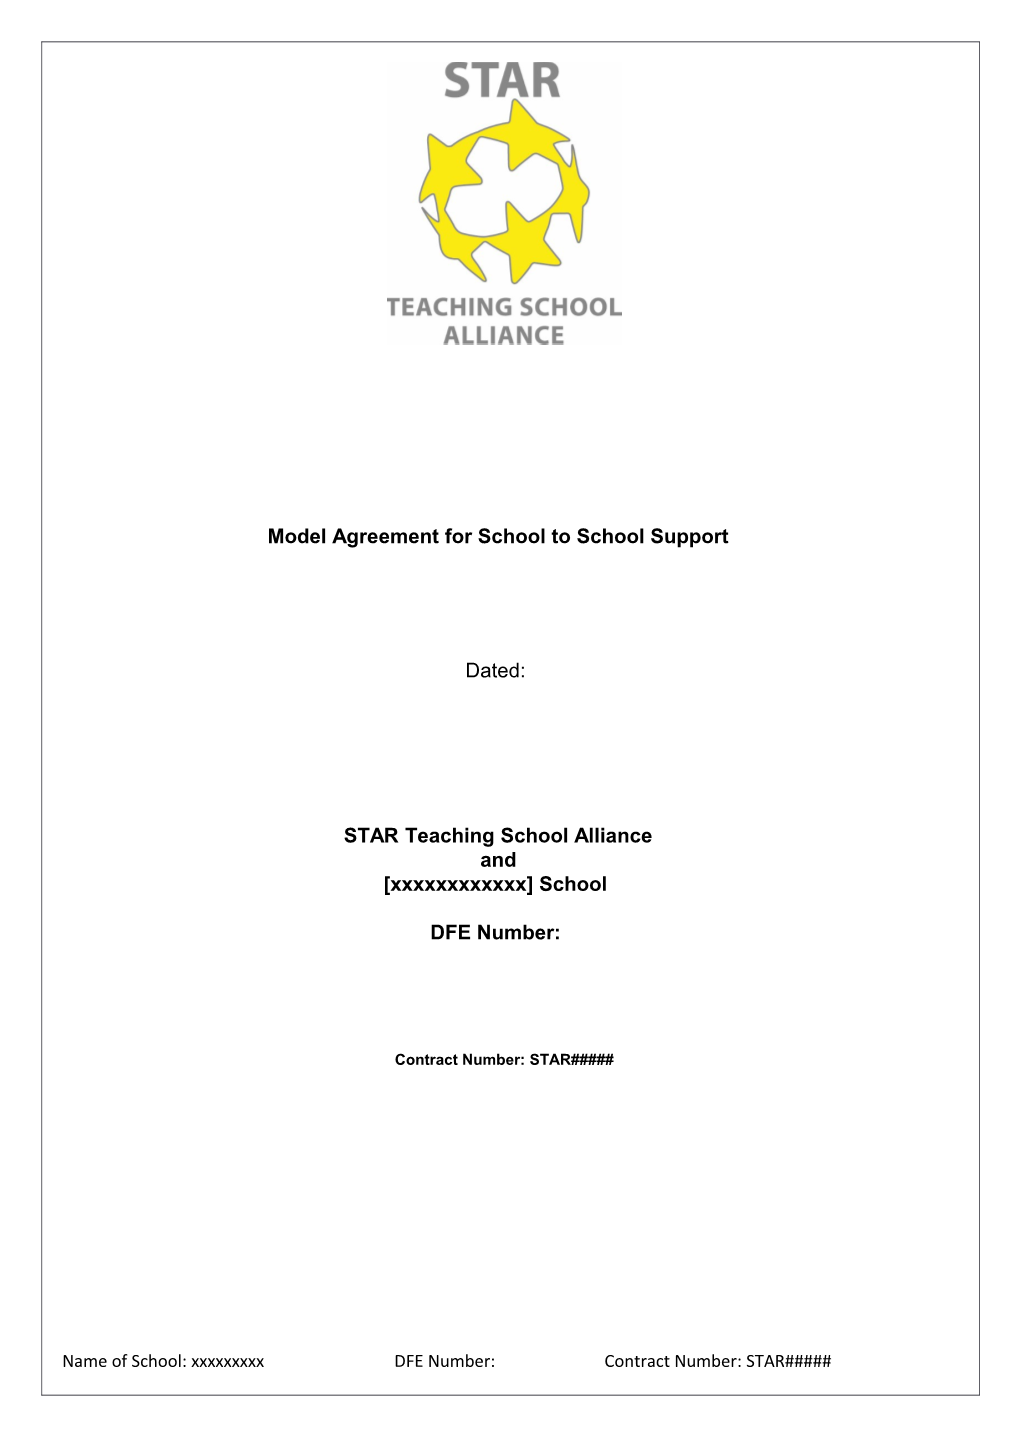 Model Agreement for School to School Support